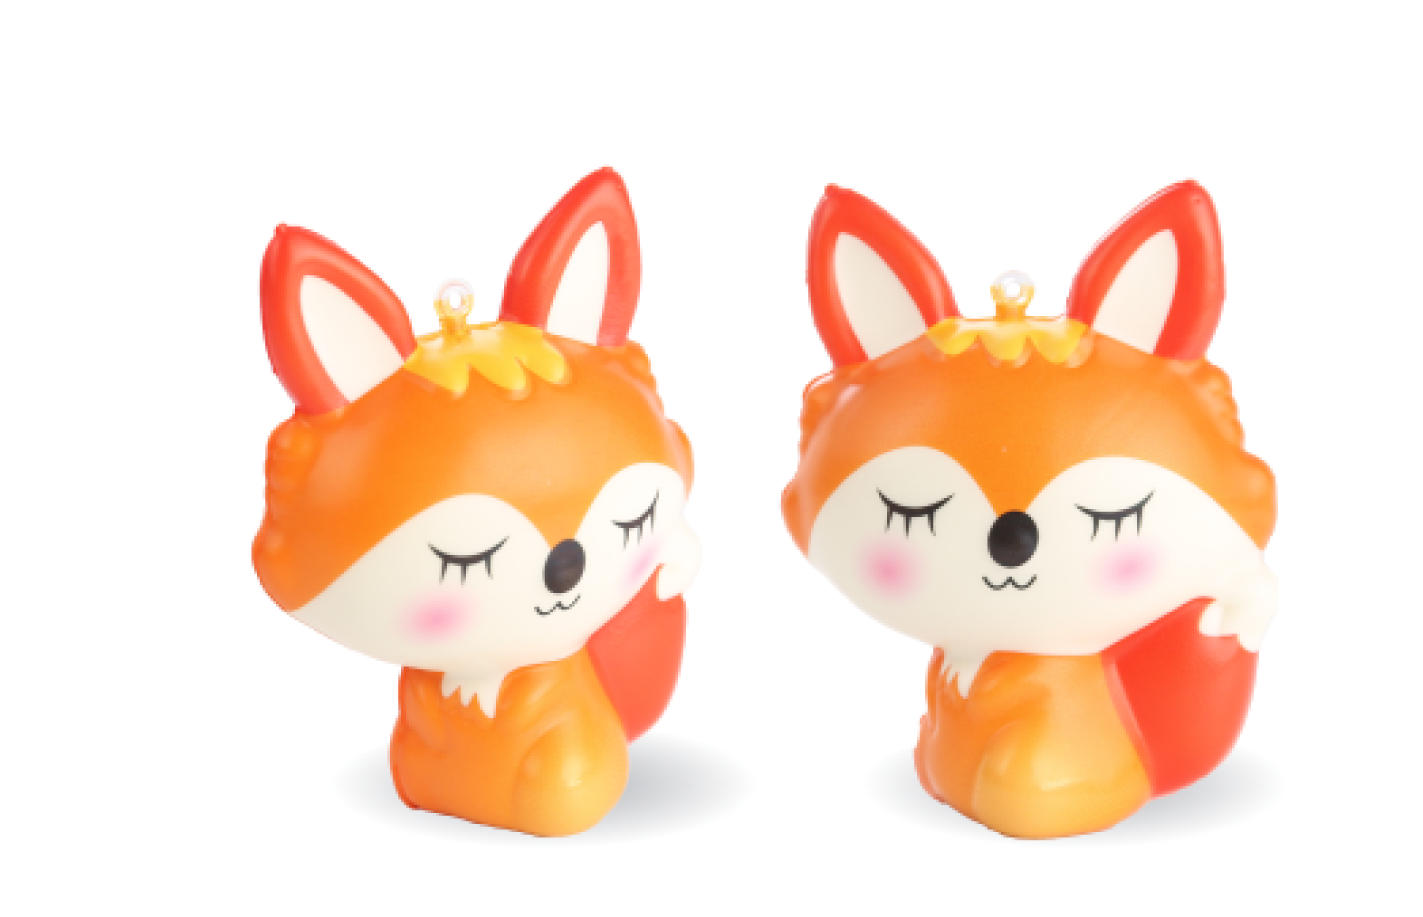 Hot Selling 10 cm slow rise fox squishy toys Artificial dessert food squeeze eco-friendly fidget cute animal for children